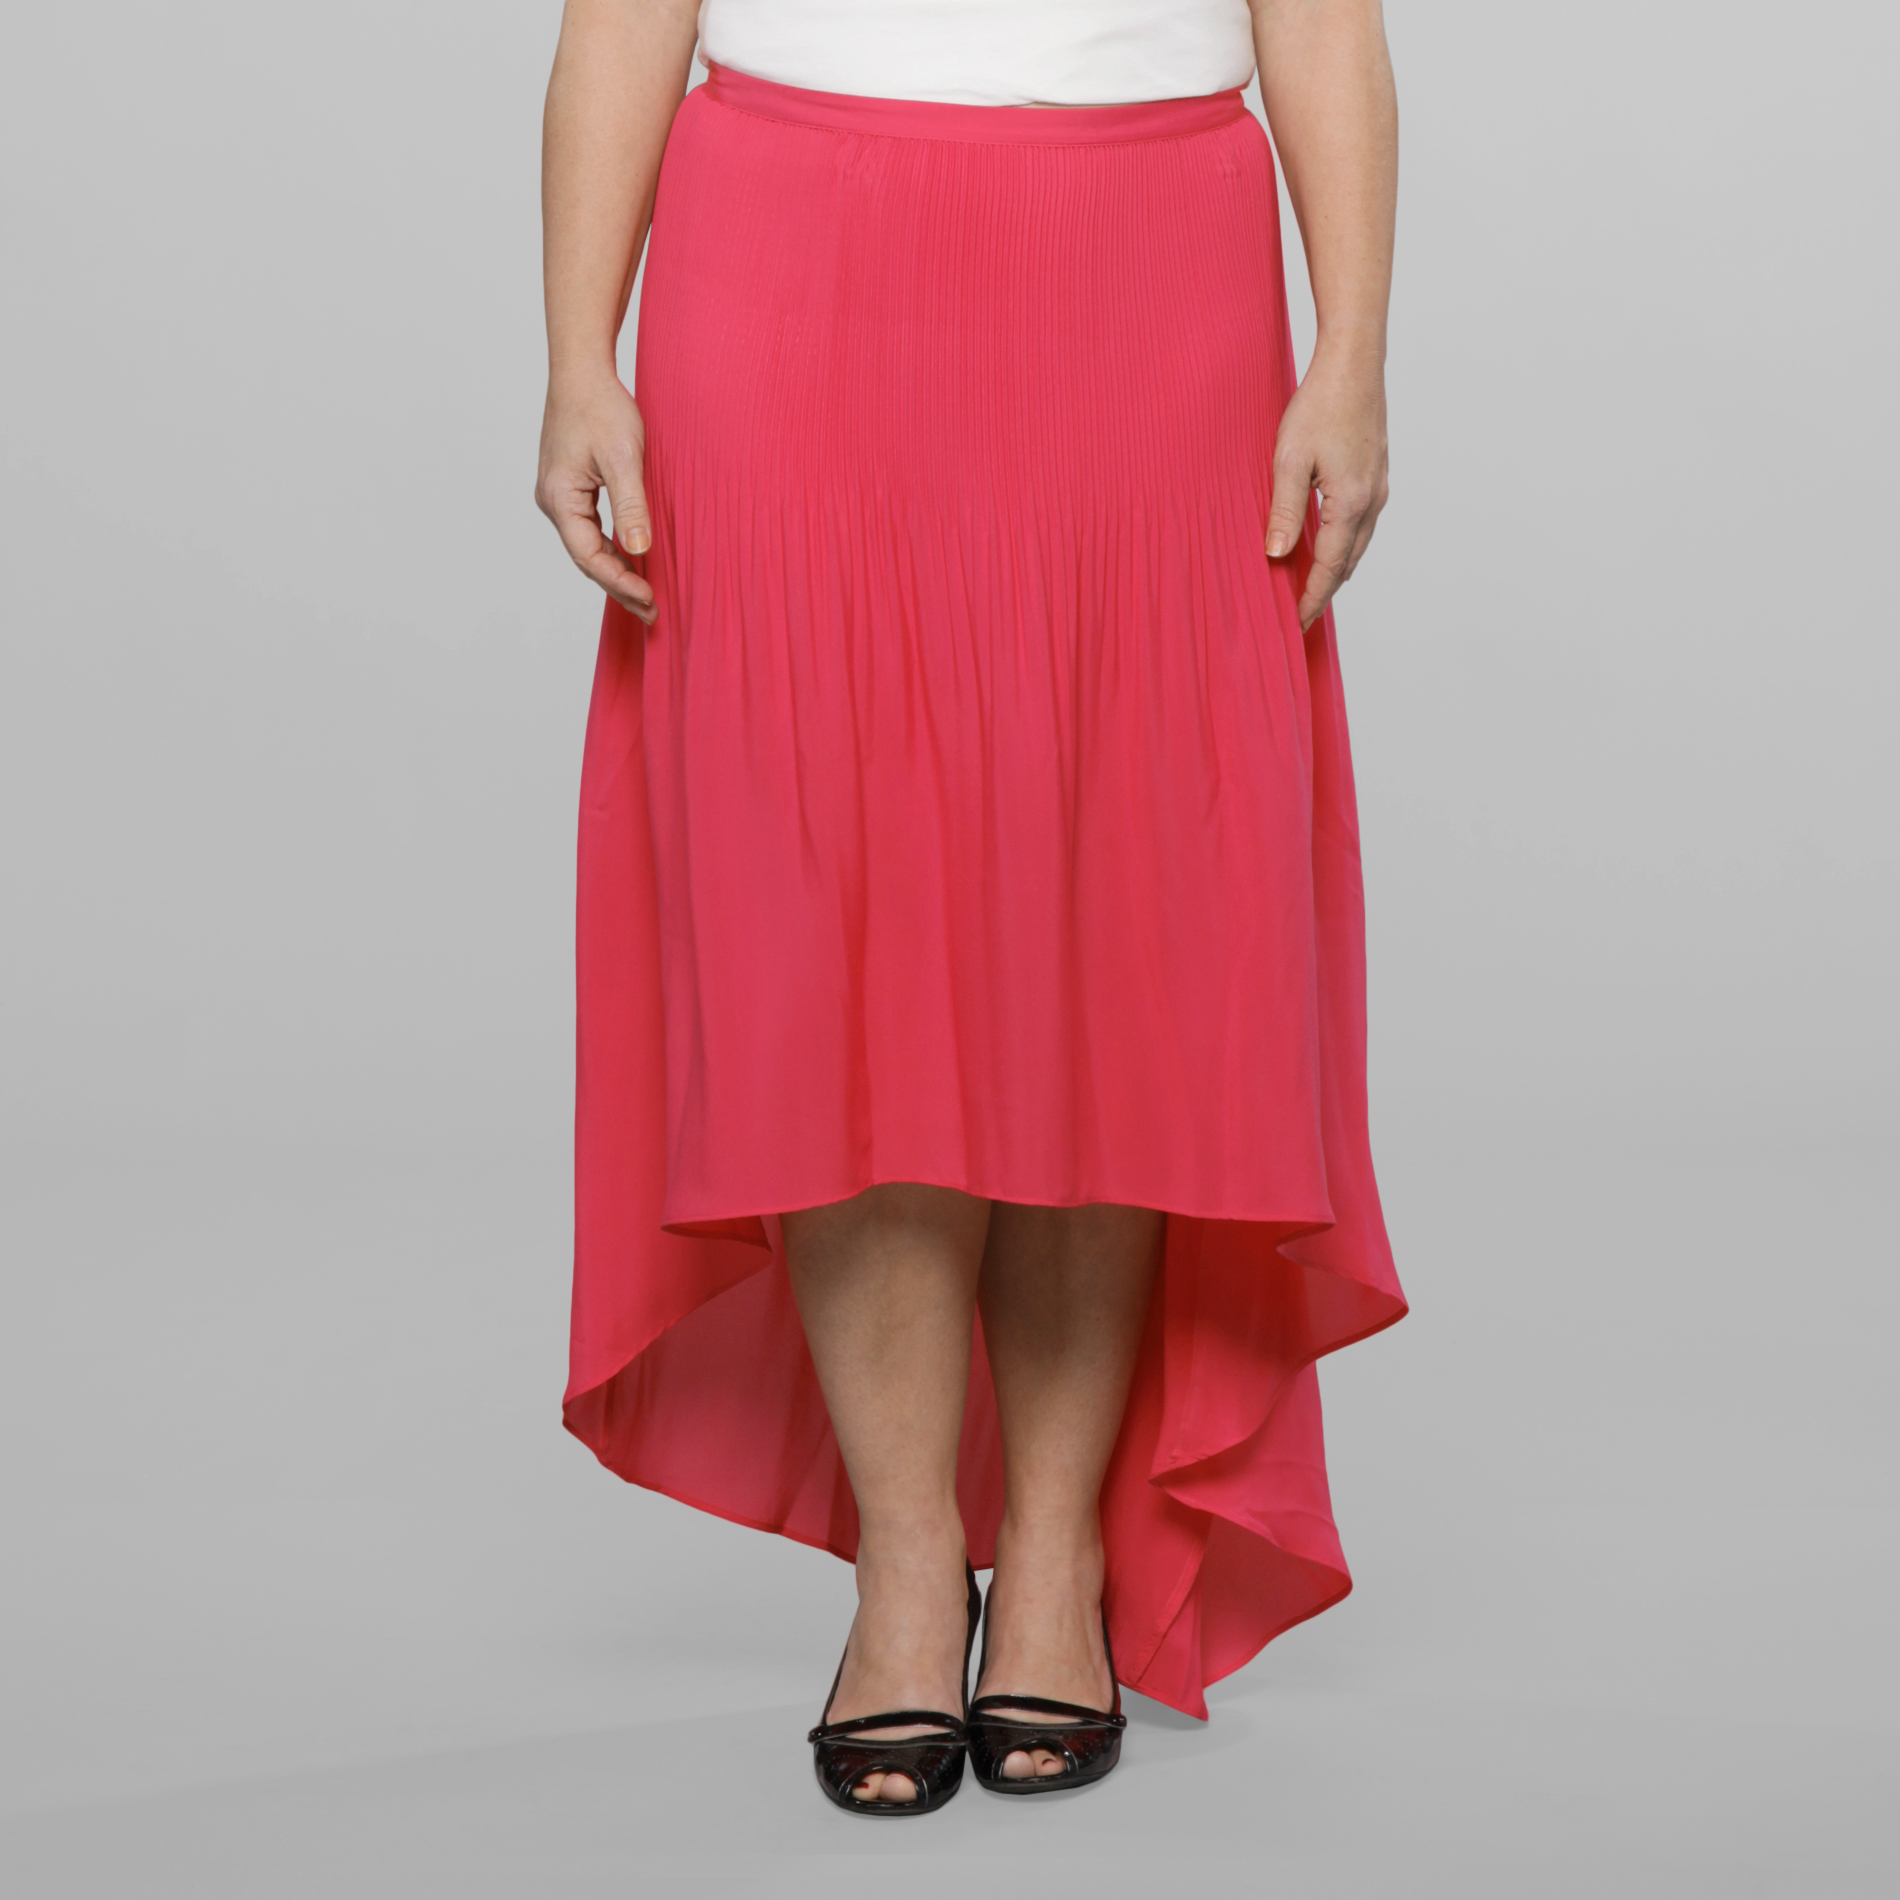 Love Your Style, Love Your Size Women's Plus Pleat and Release Hi Low Skirt